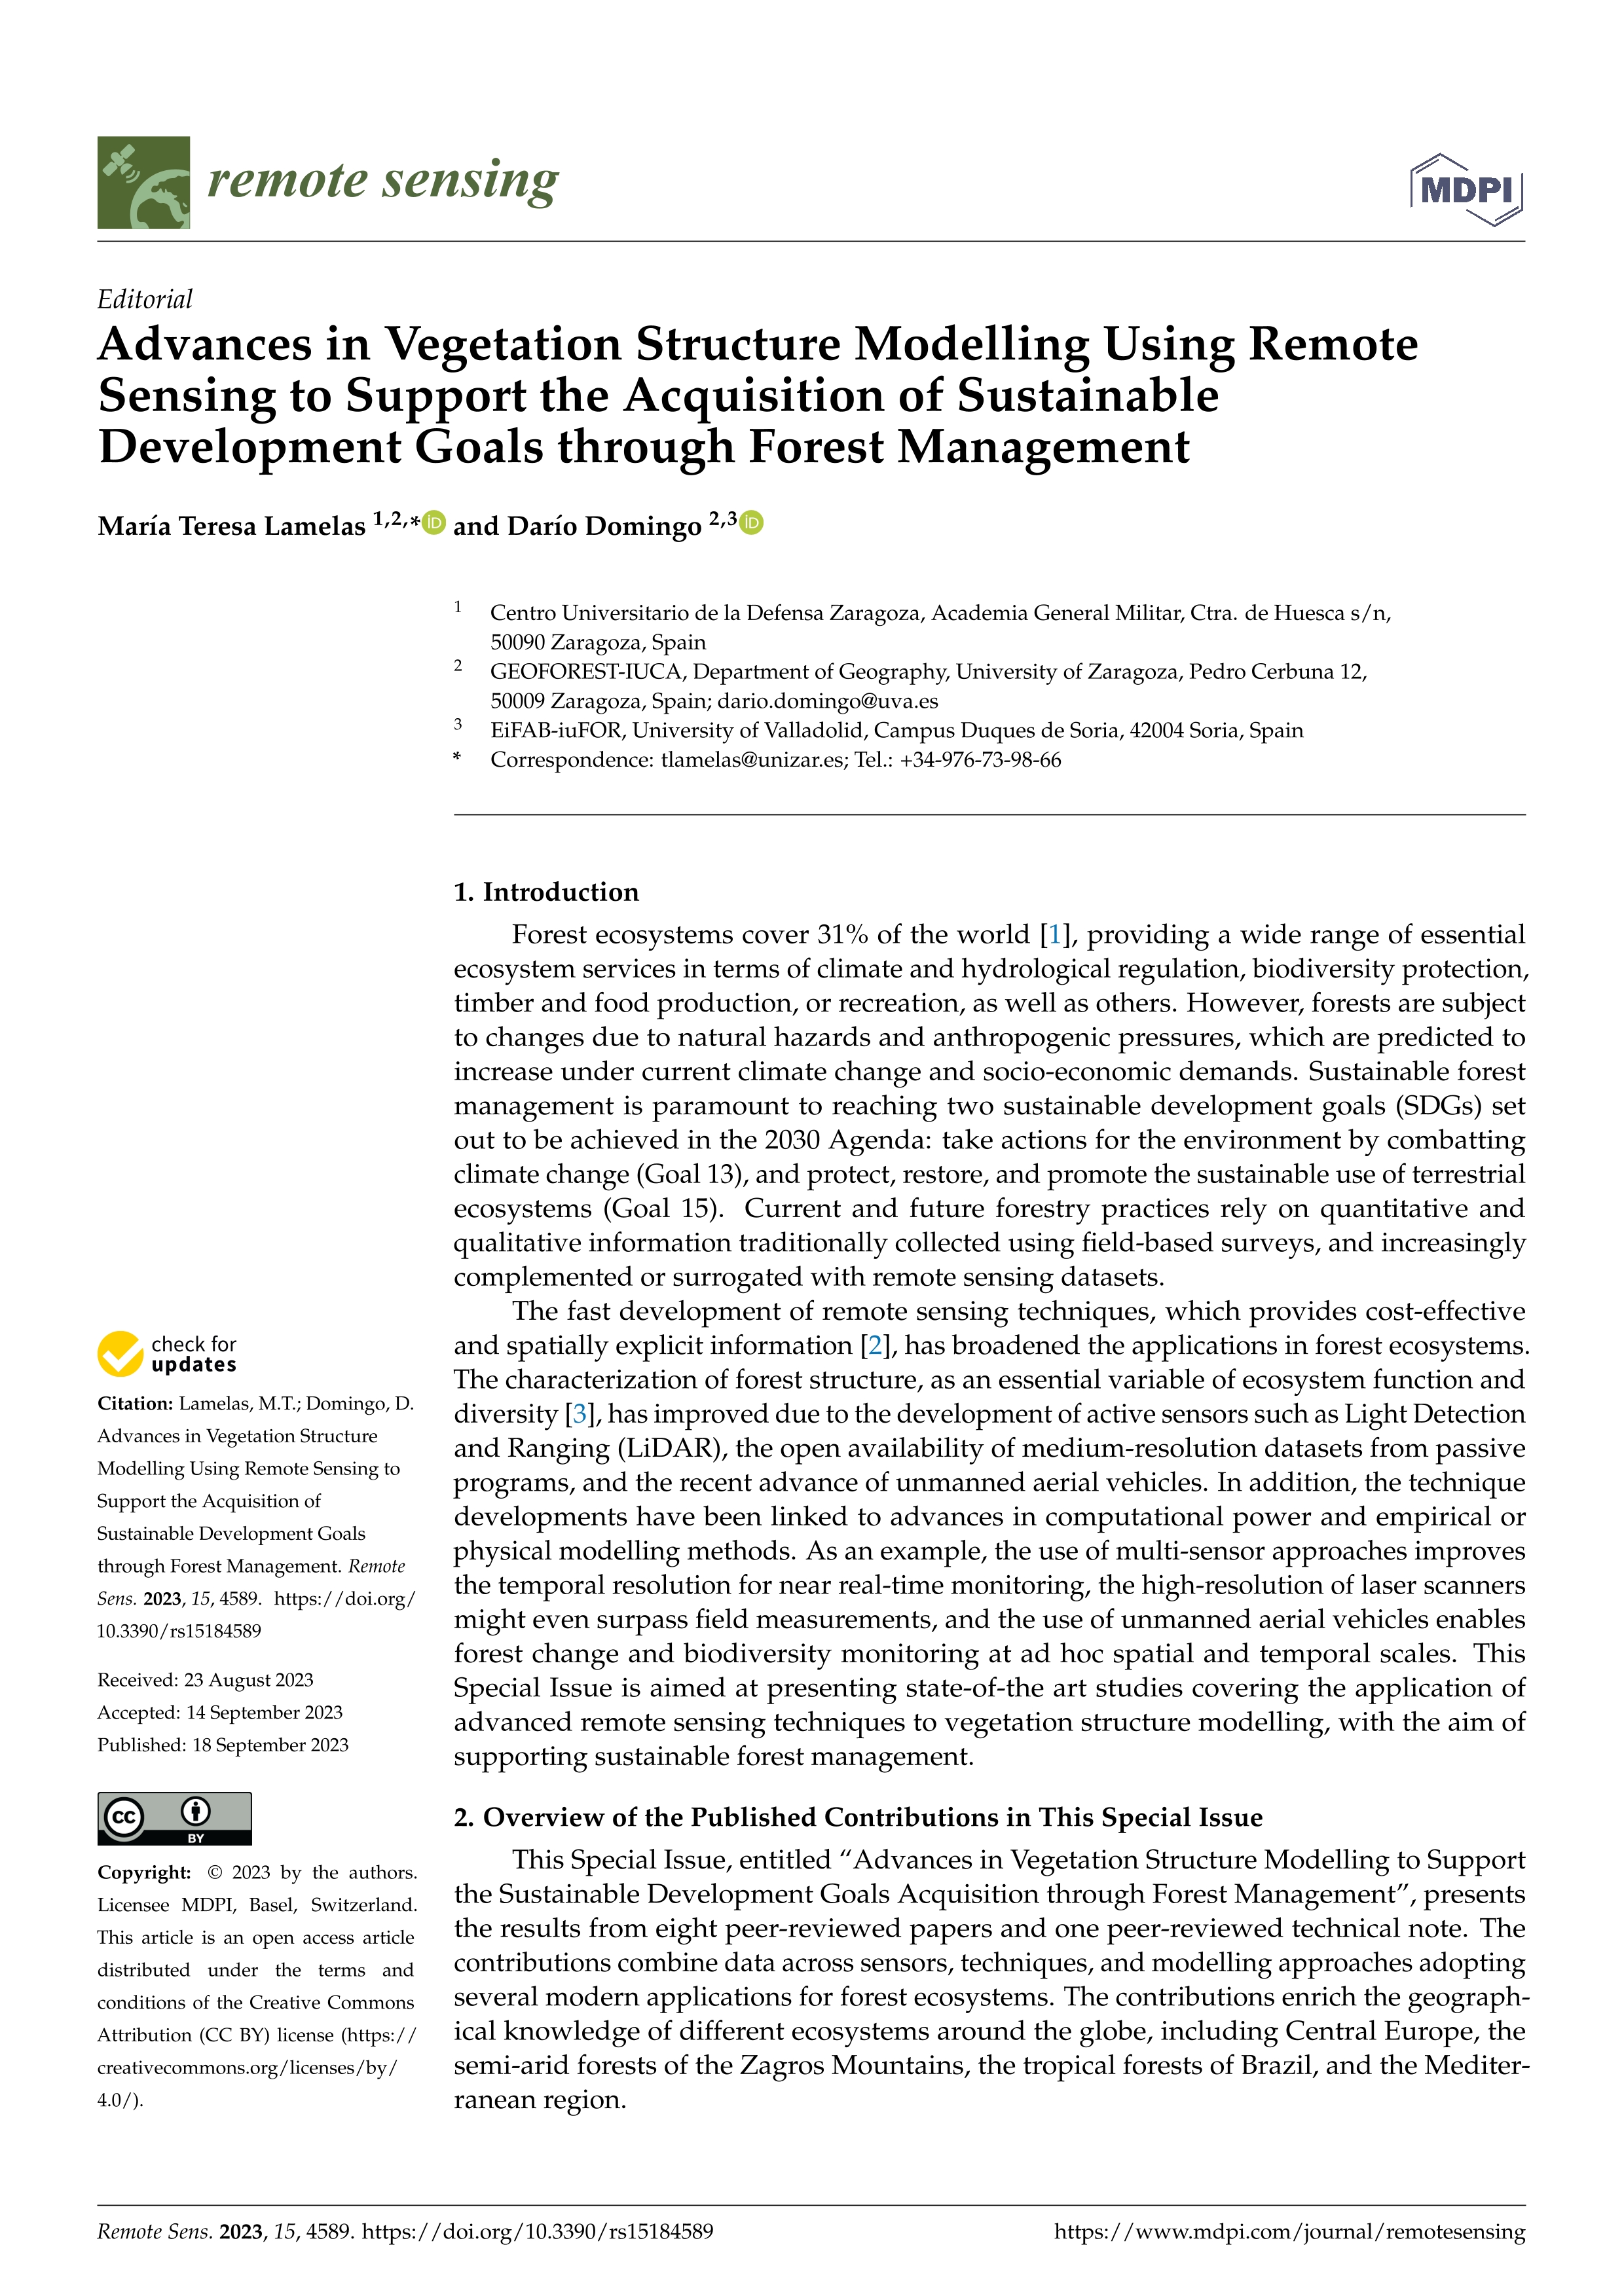 Advances in vegetation structure modelling using remote sensing to support the acquisition of sustainable development goals through forest management